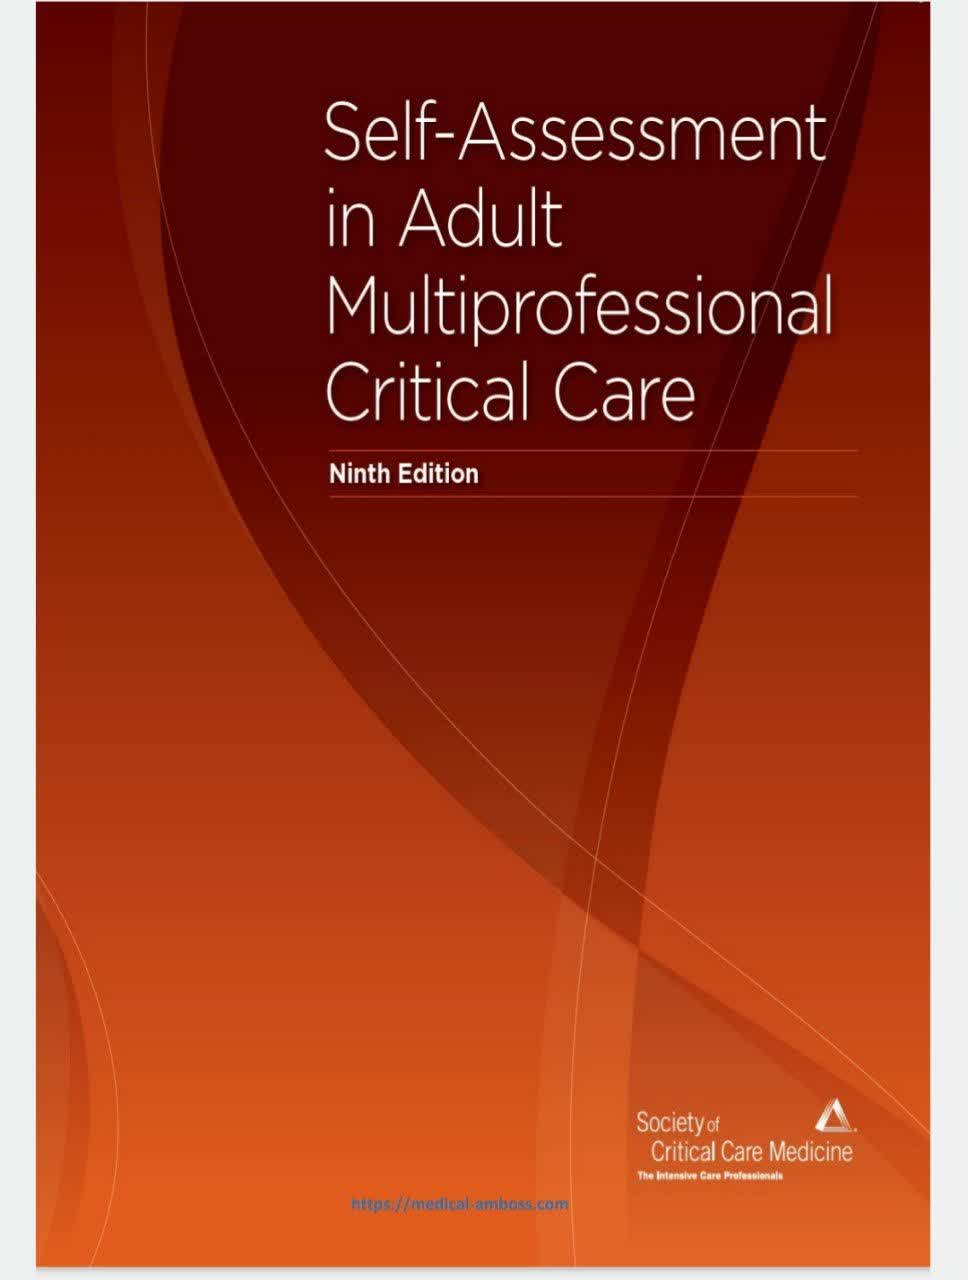 Self-Assessment in Adult Multiprofessional Critical Care